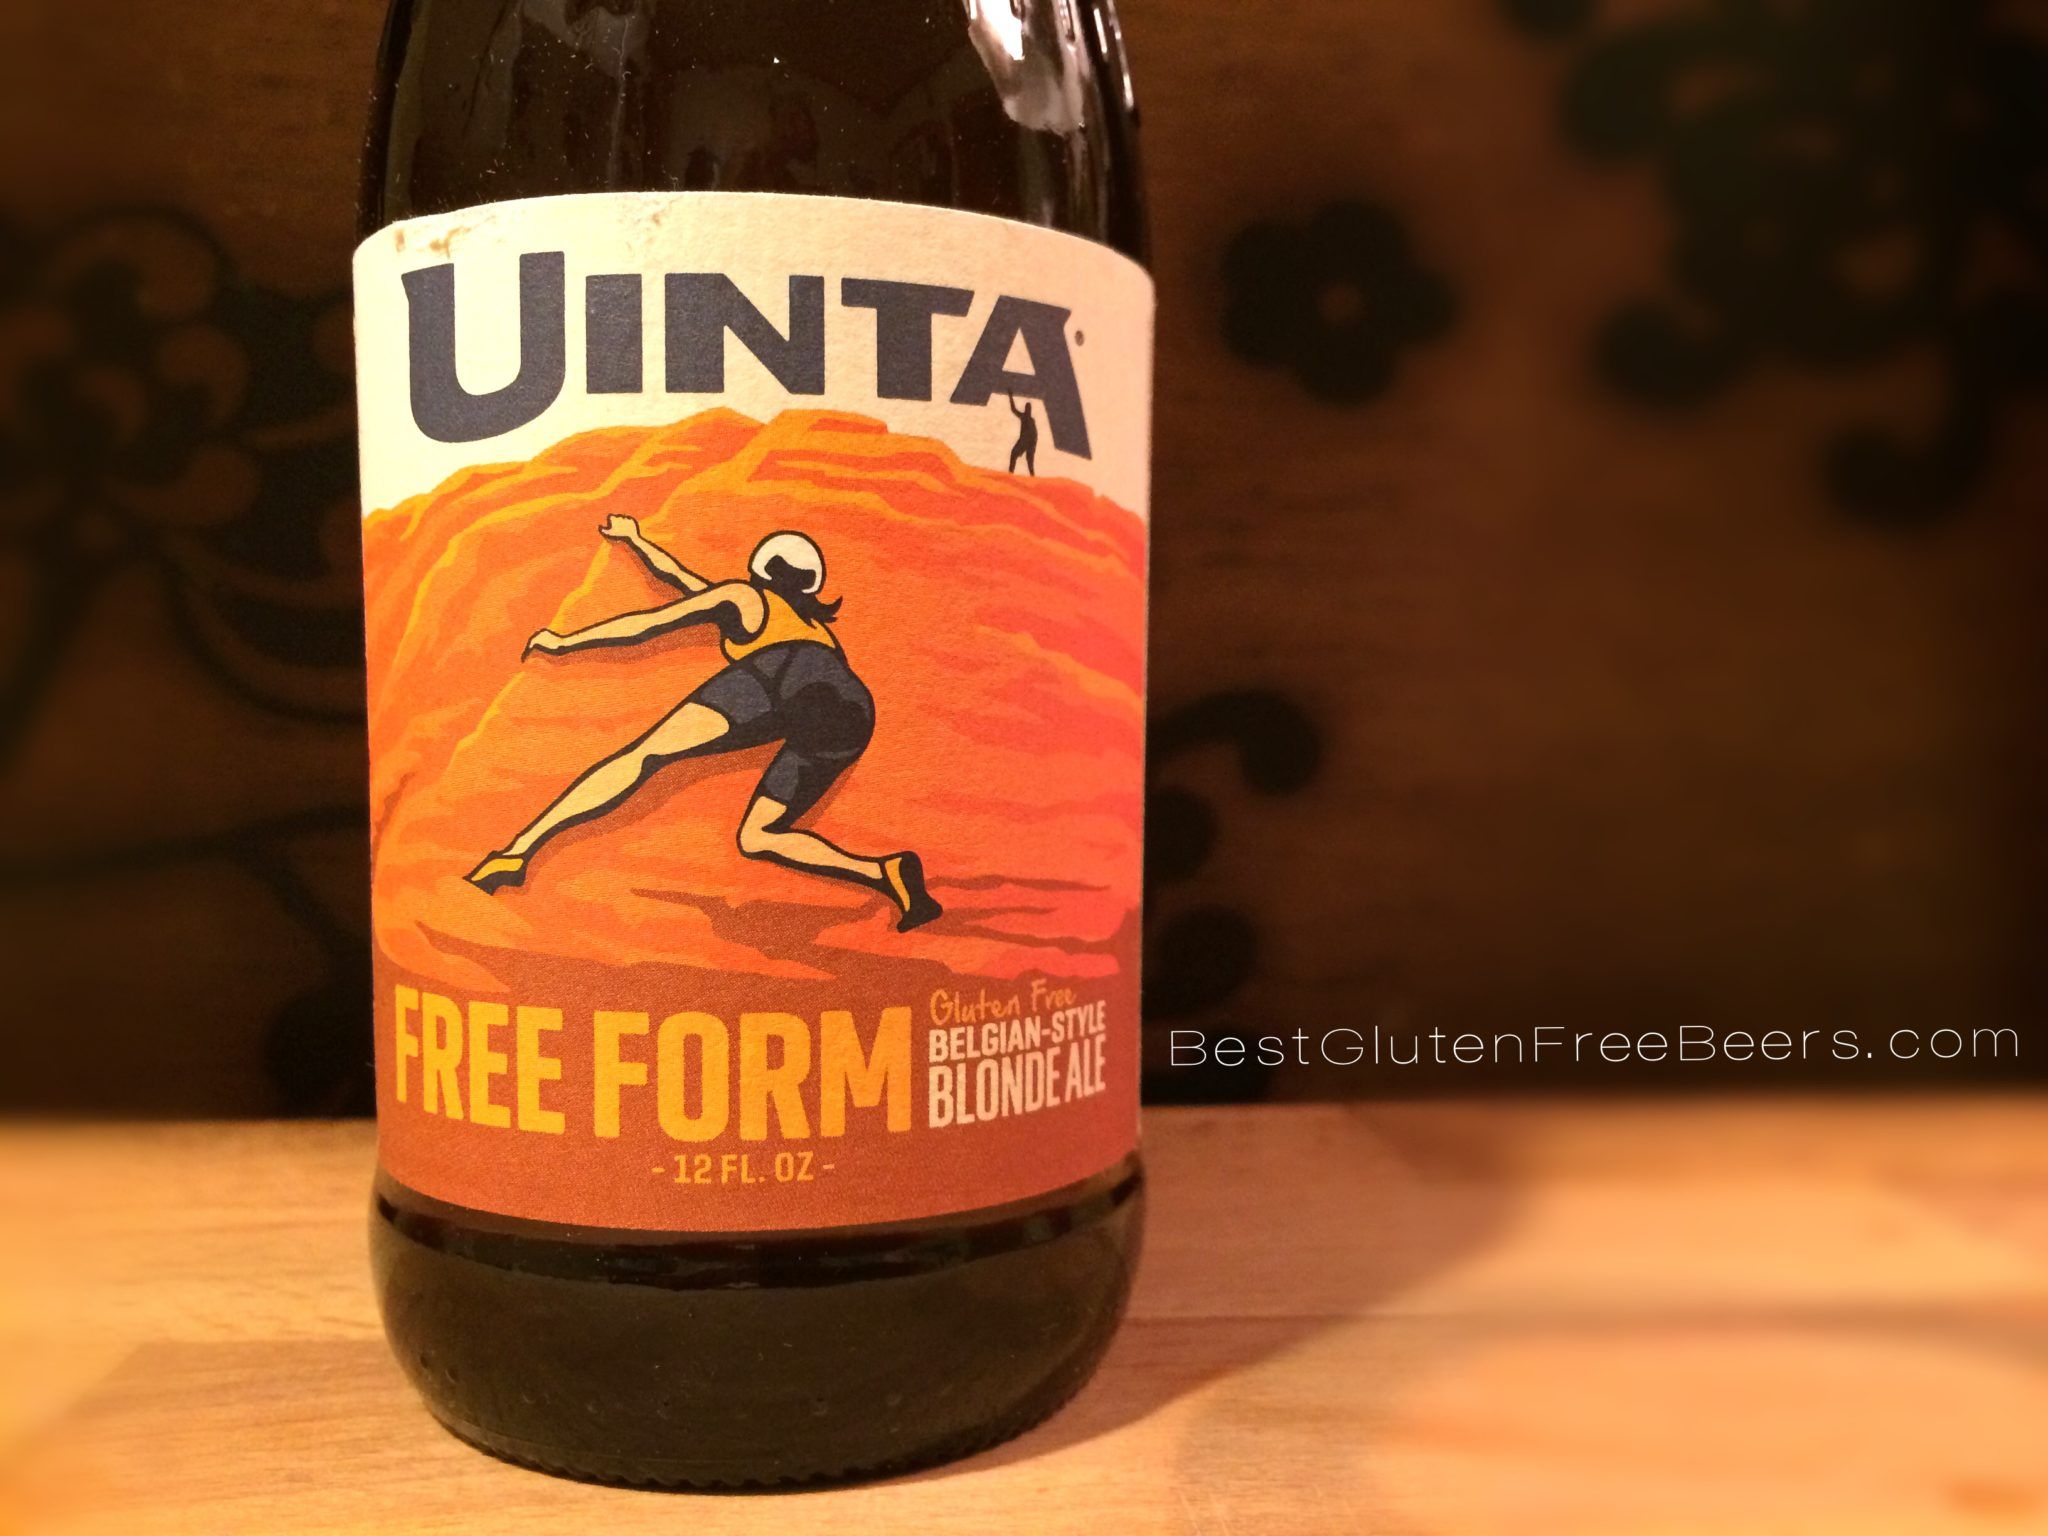 uinta brewing free form blonde ale belgian style beer review